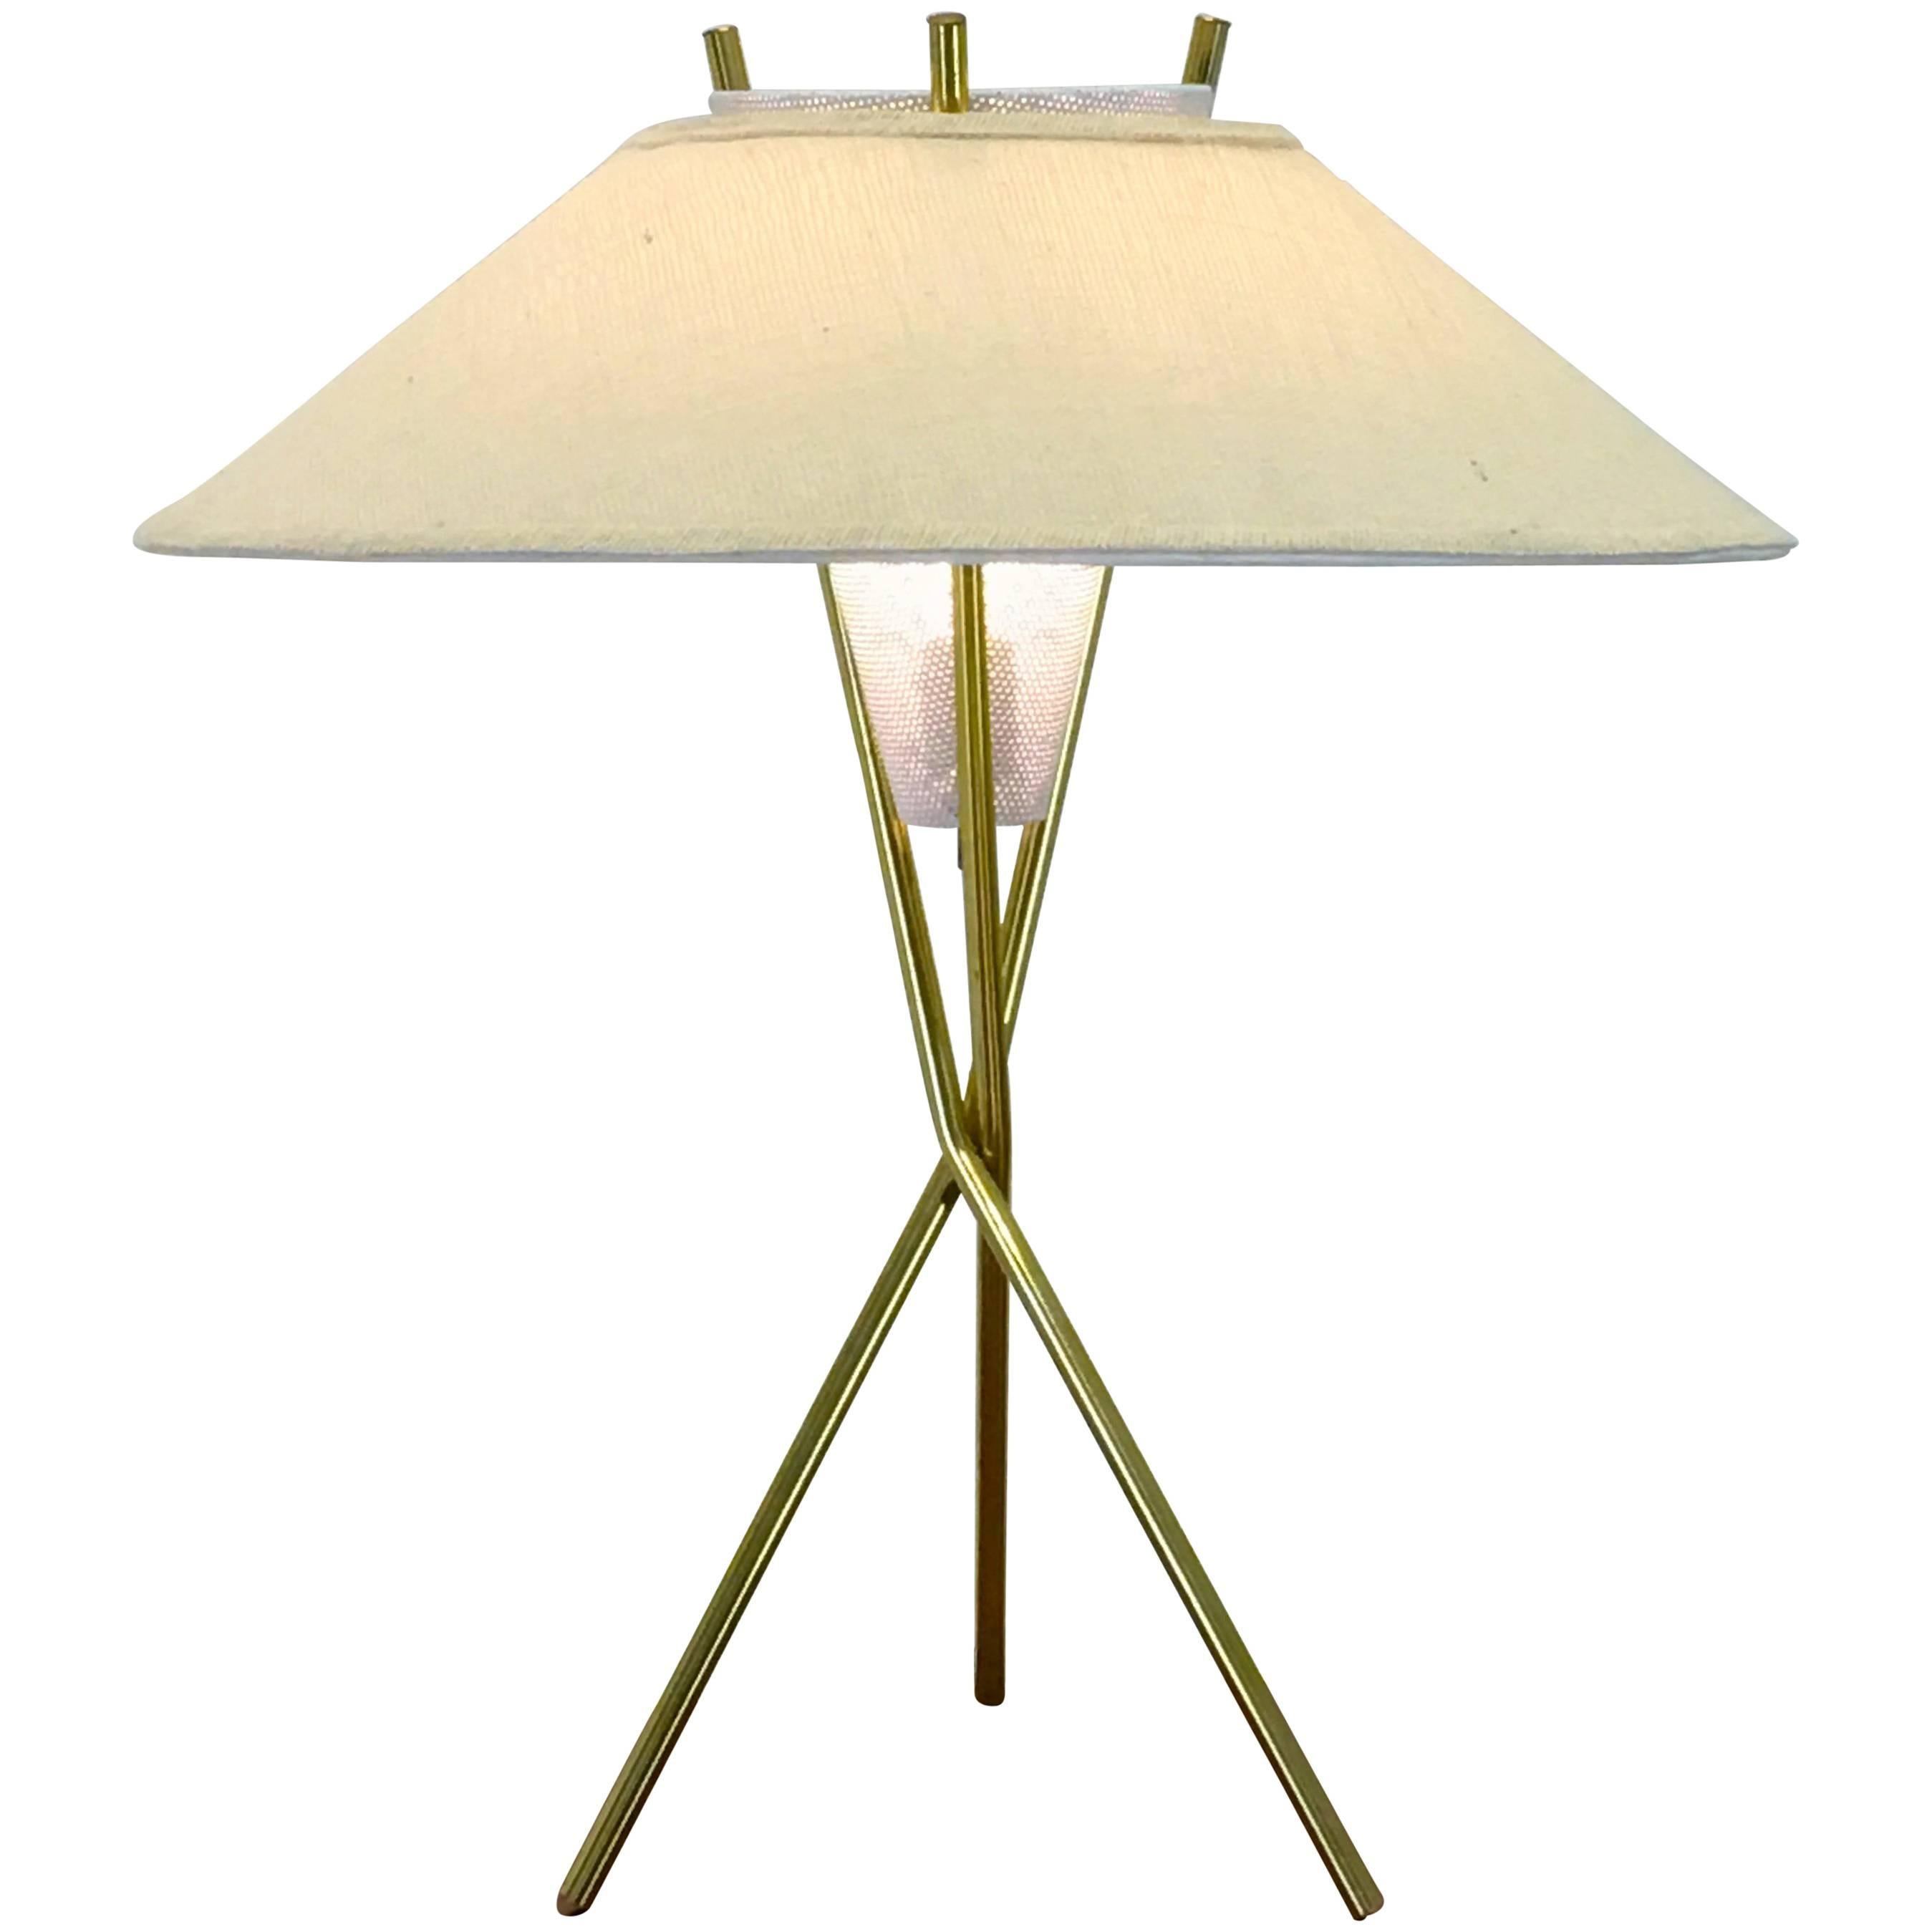 Original Tripod Table Lamp and Shade by Gerald Thurston for Lightolier